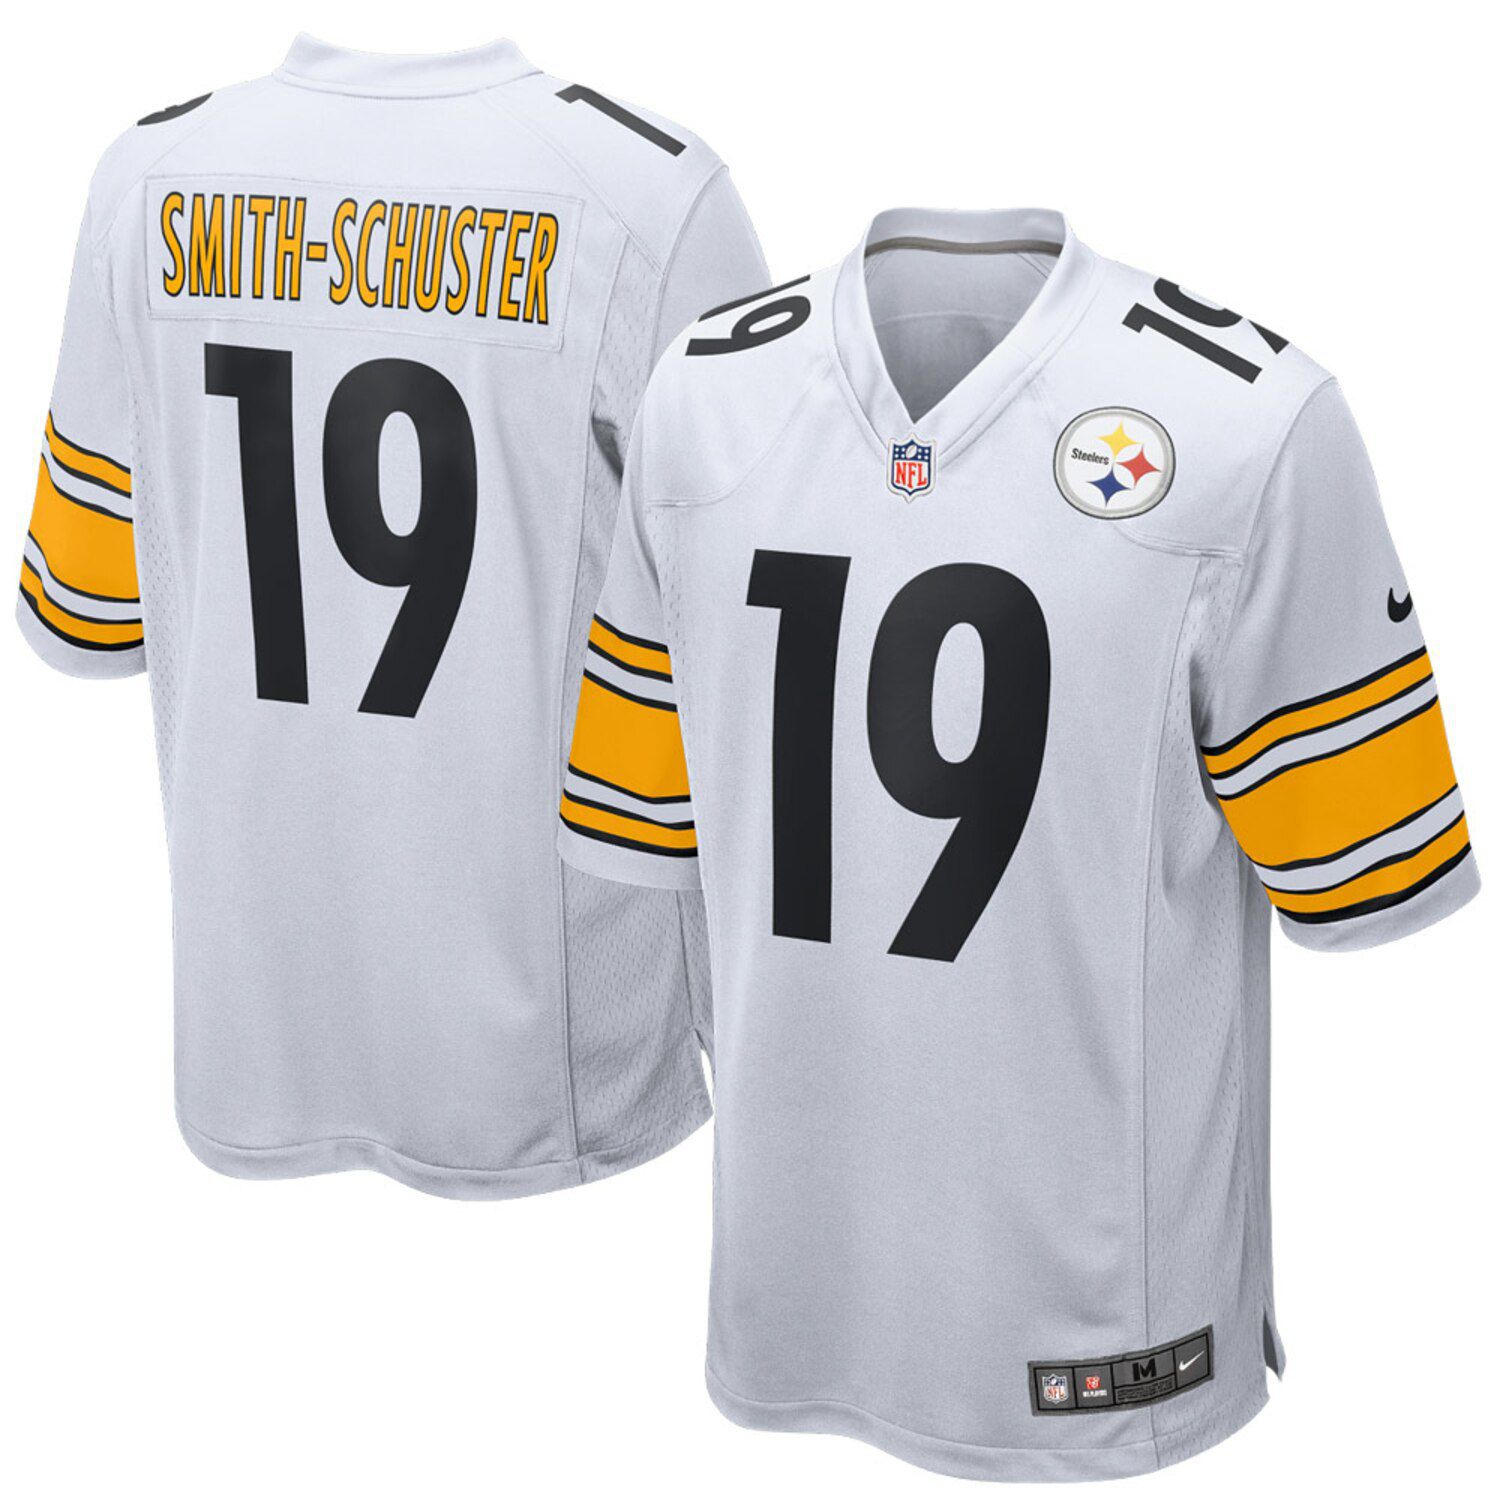 pittsburgh steelers jersey 2018